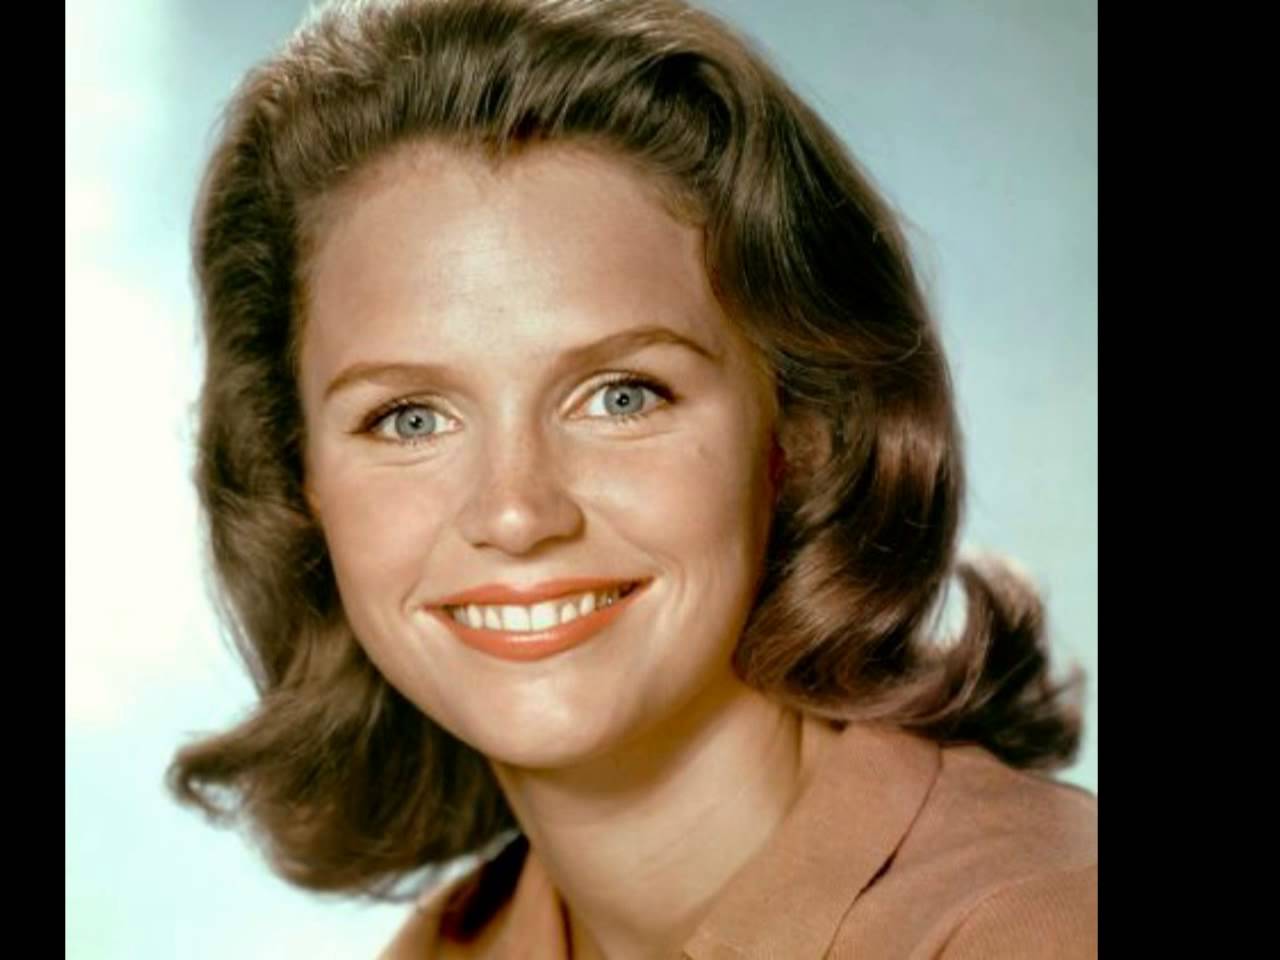 More Pictures Of Lee Remick. lee remick images. 